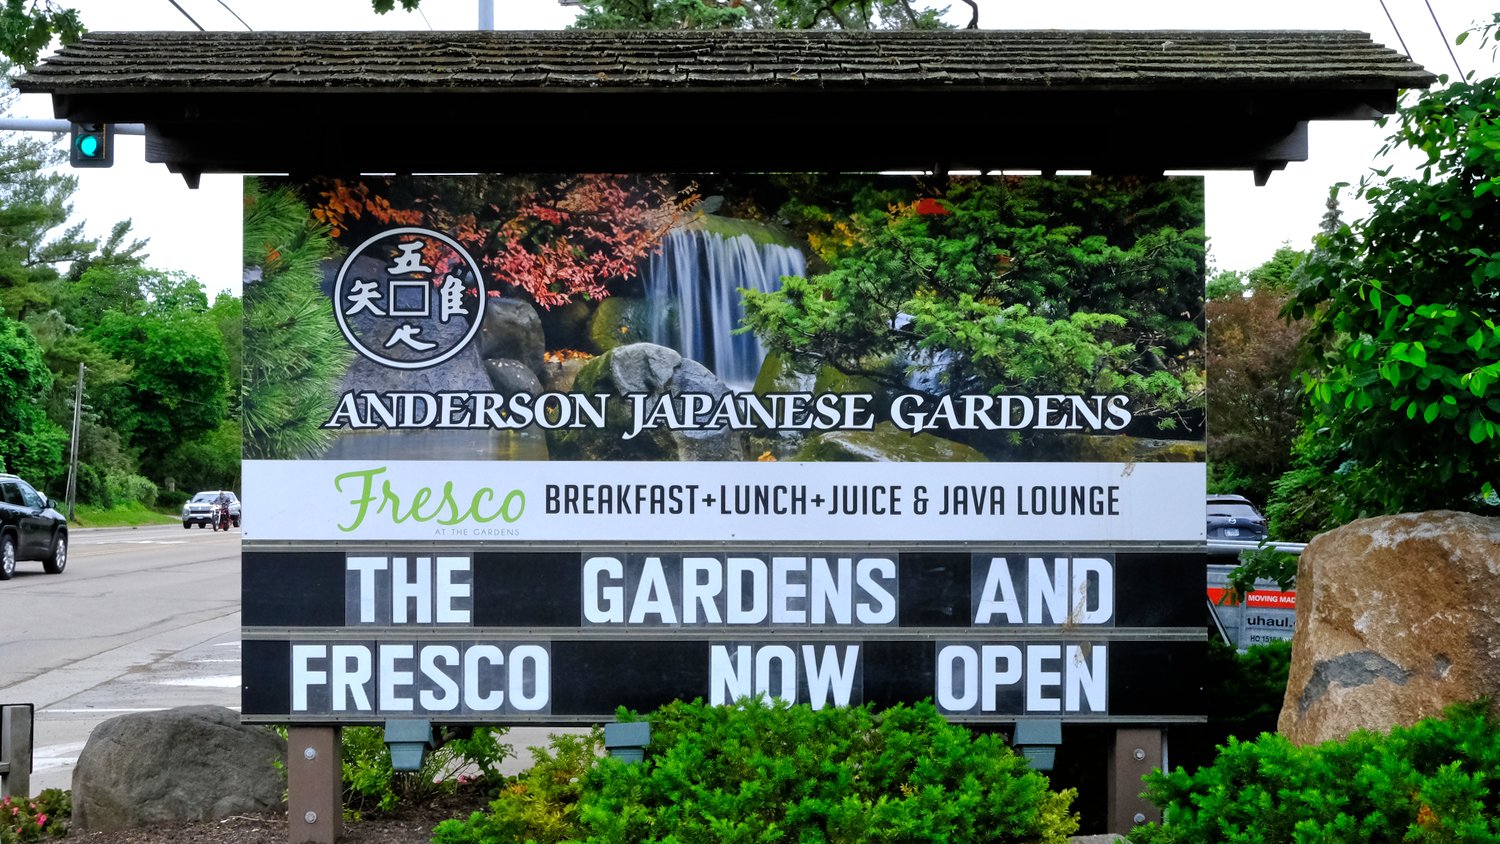 Exterior sign at entrance to the Anderson Japanese Gardens.